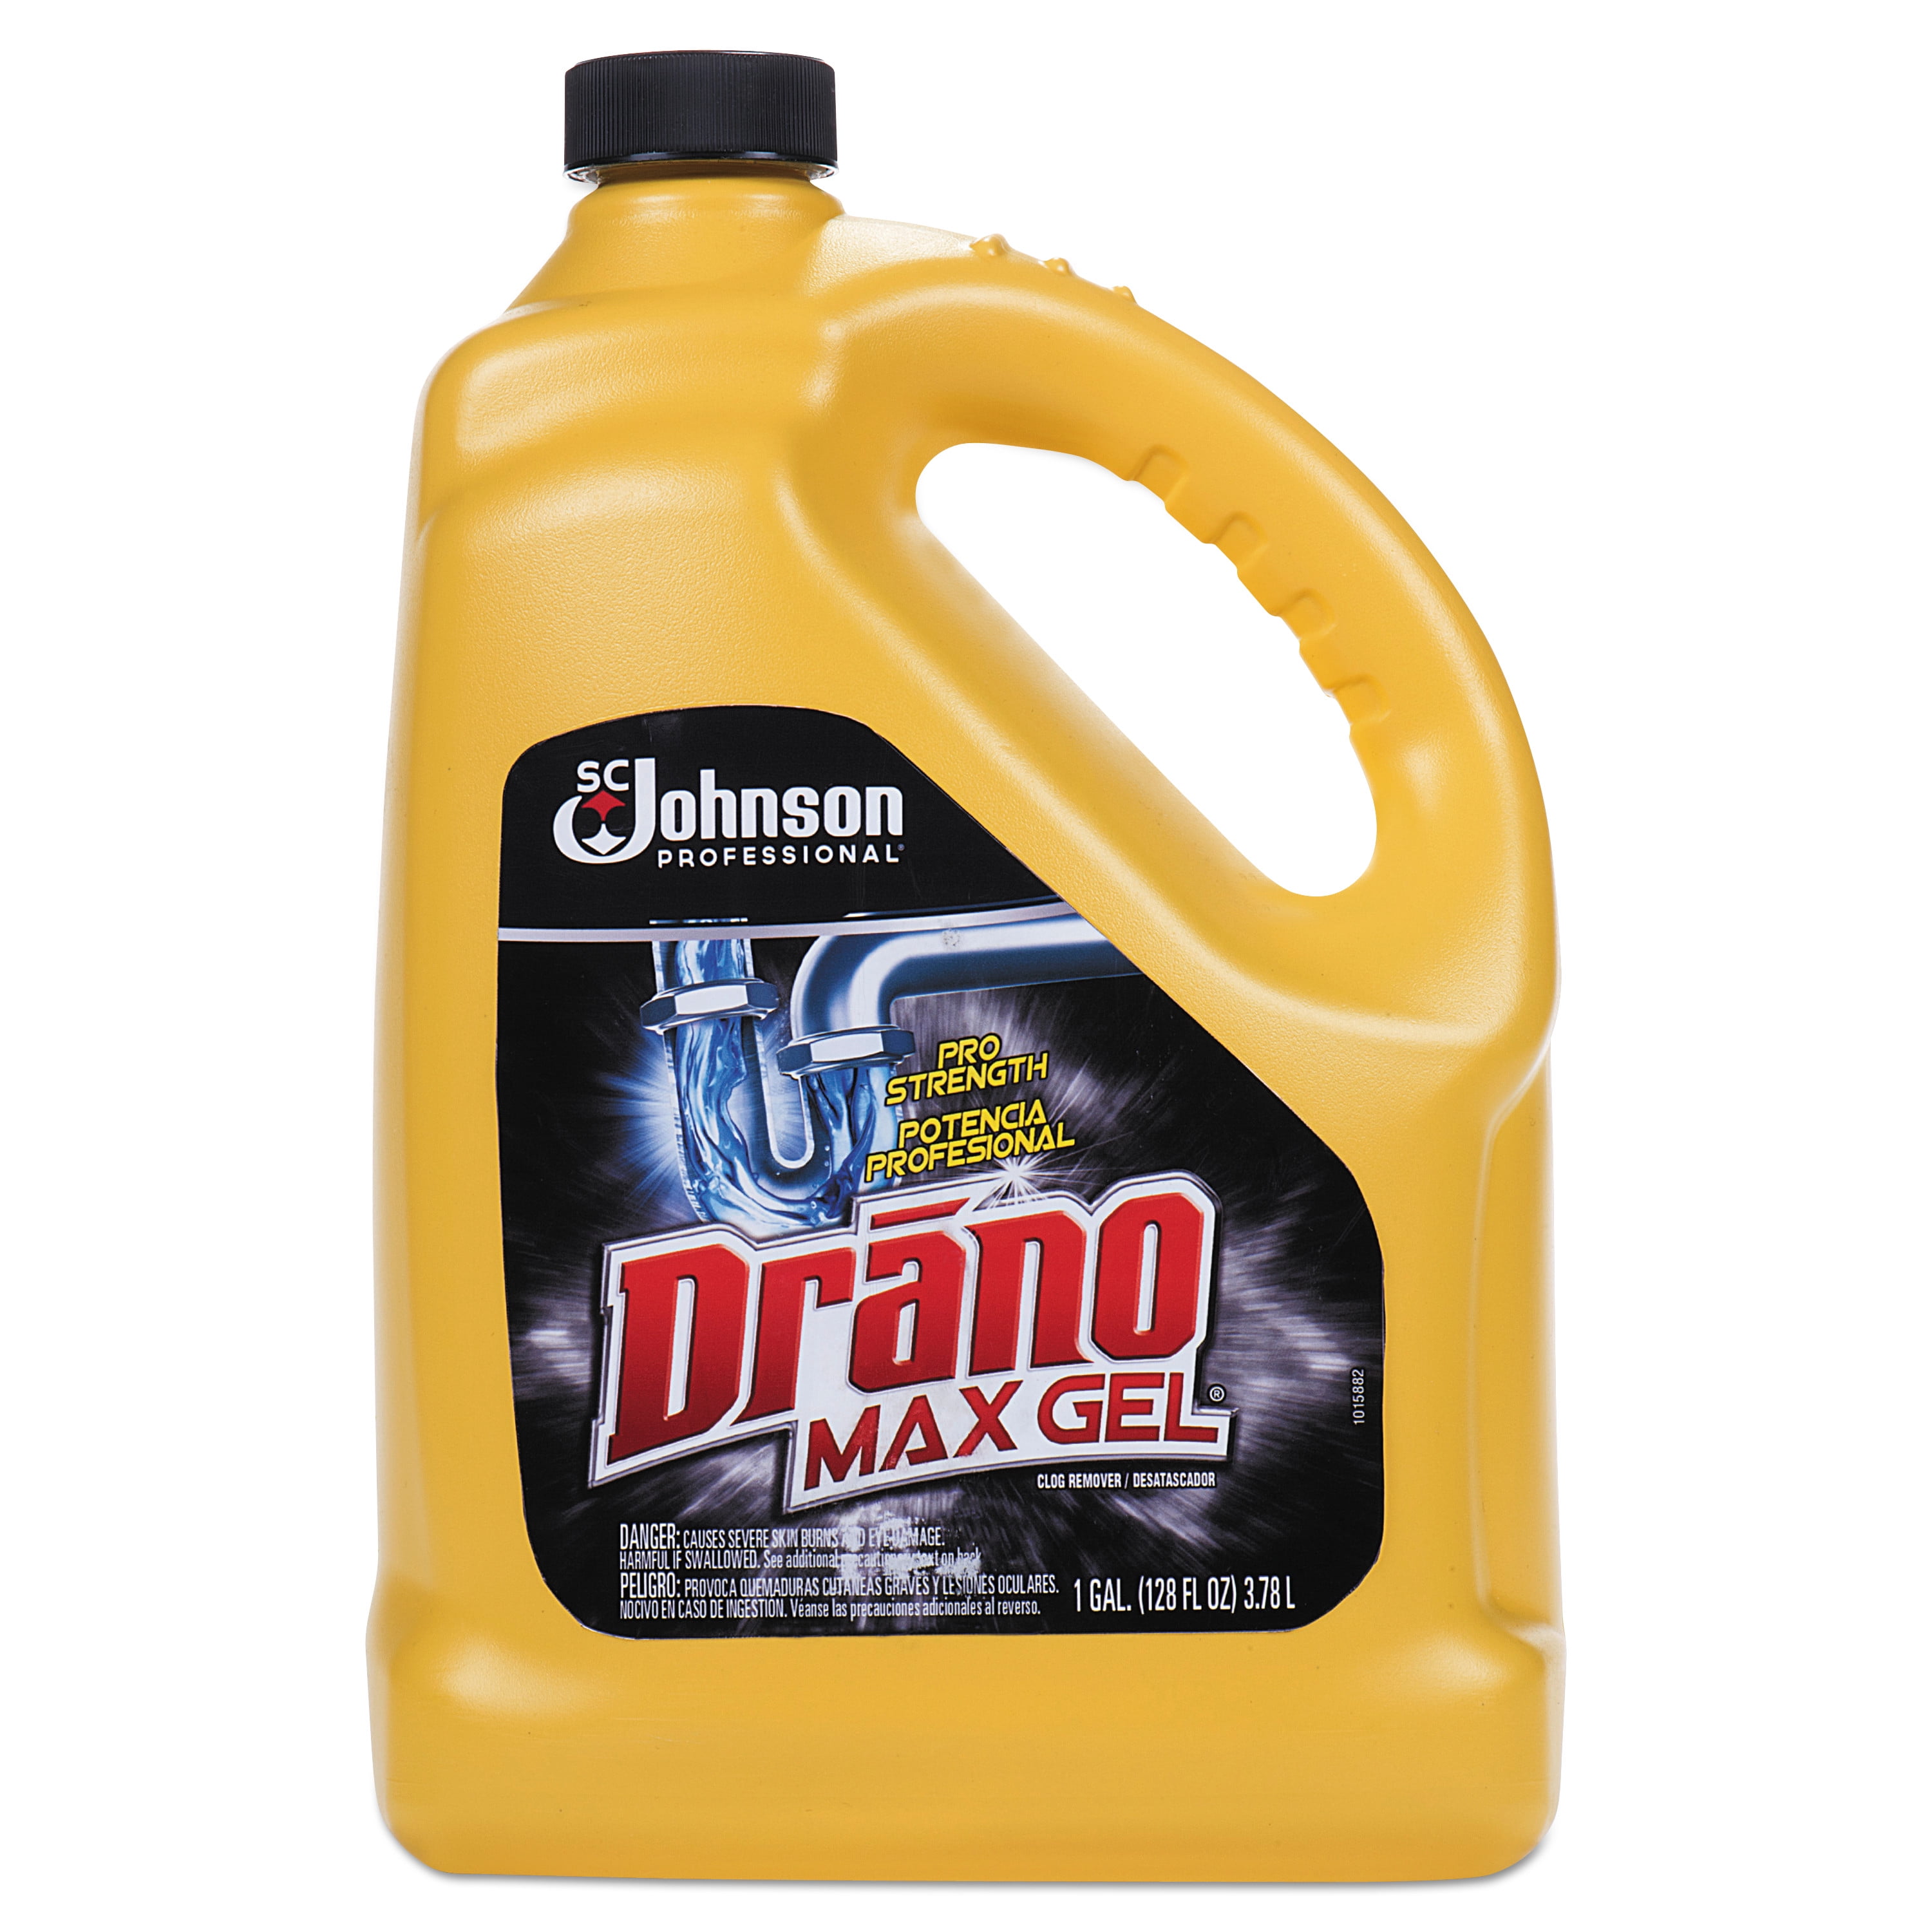 Great Value Drain Clog Remover, Unscented, 80 fl oz